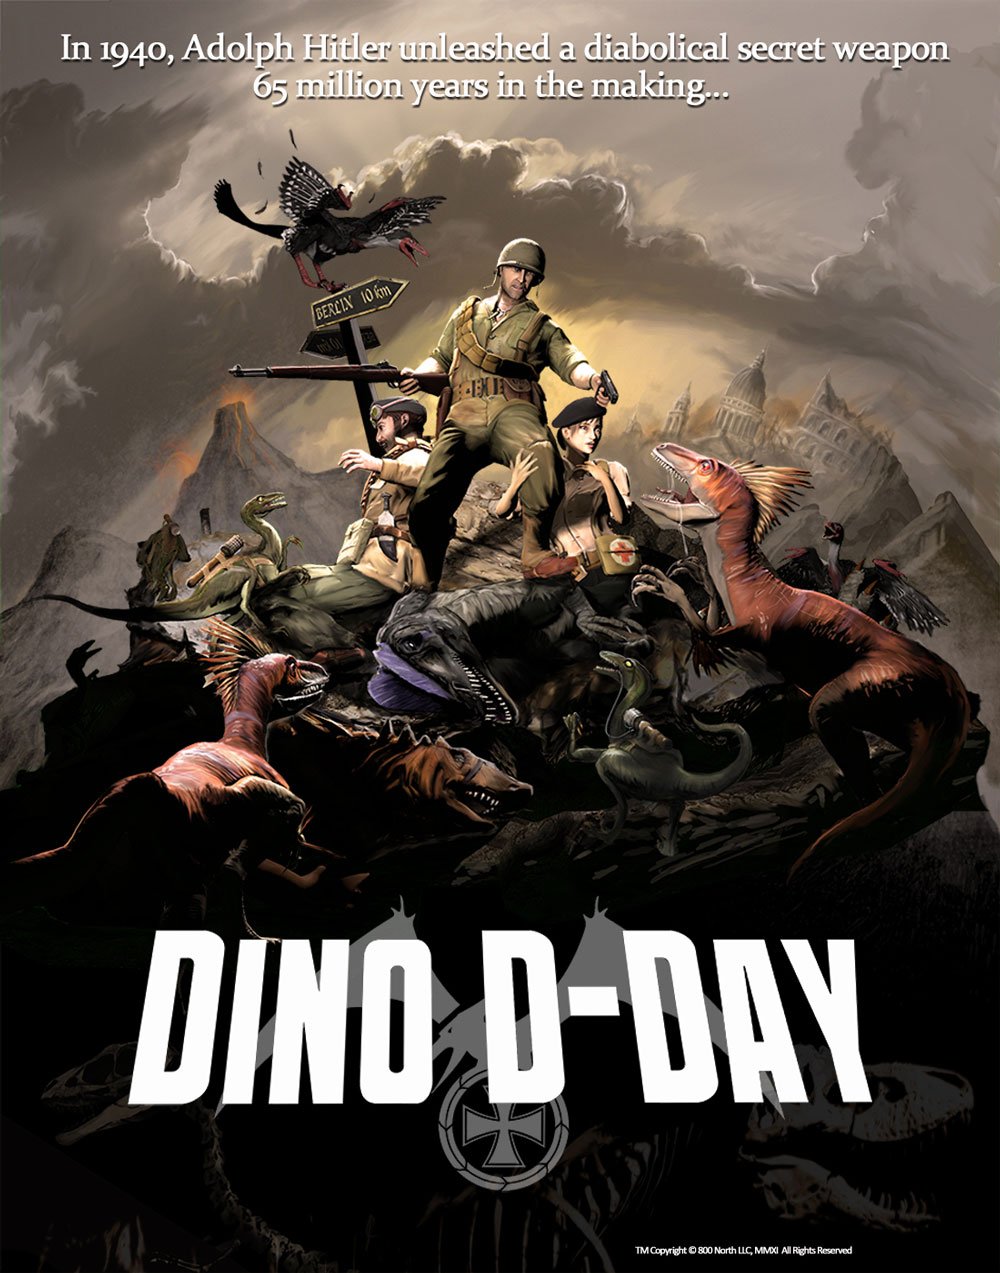 Image of Dino D-Day